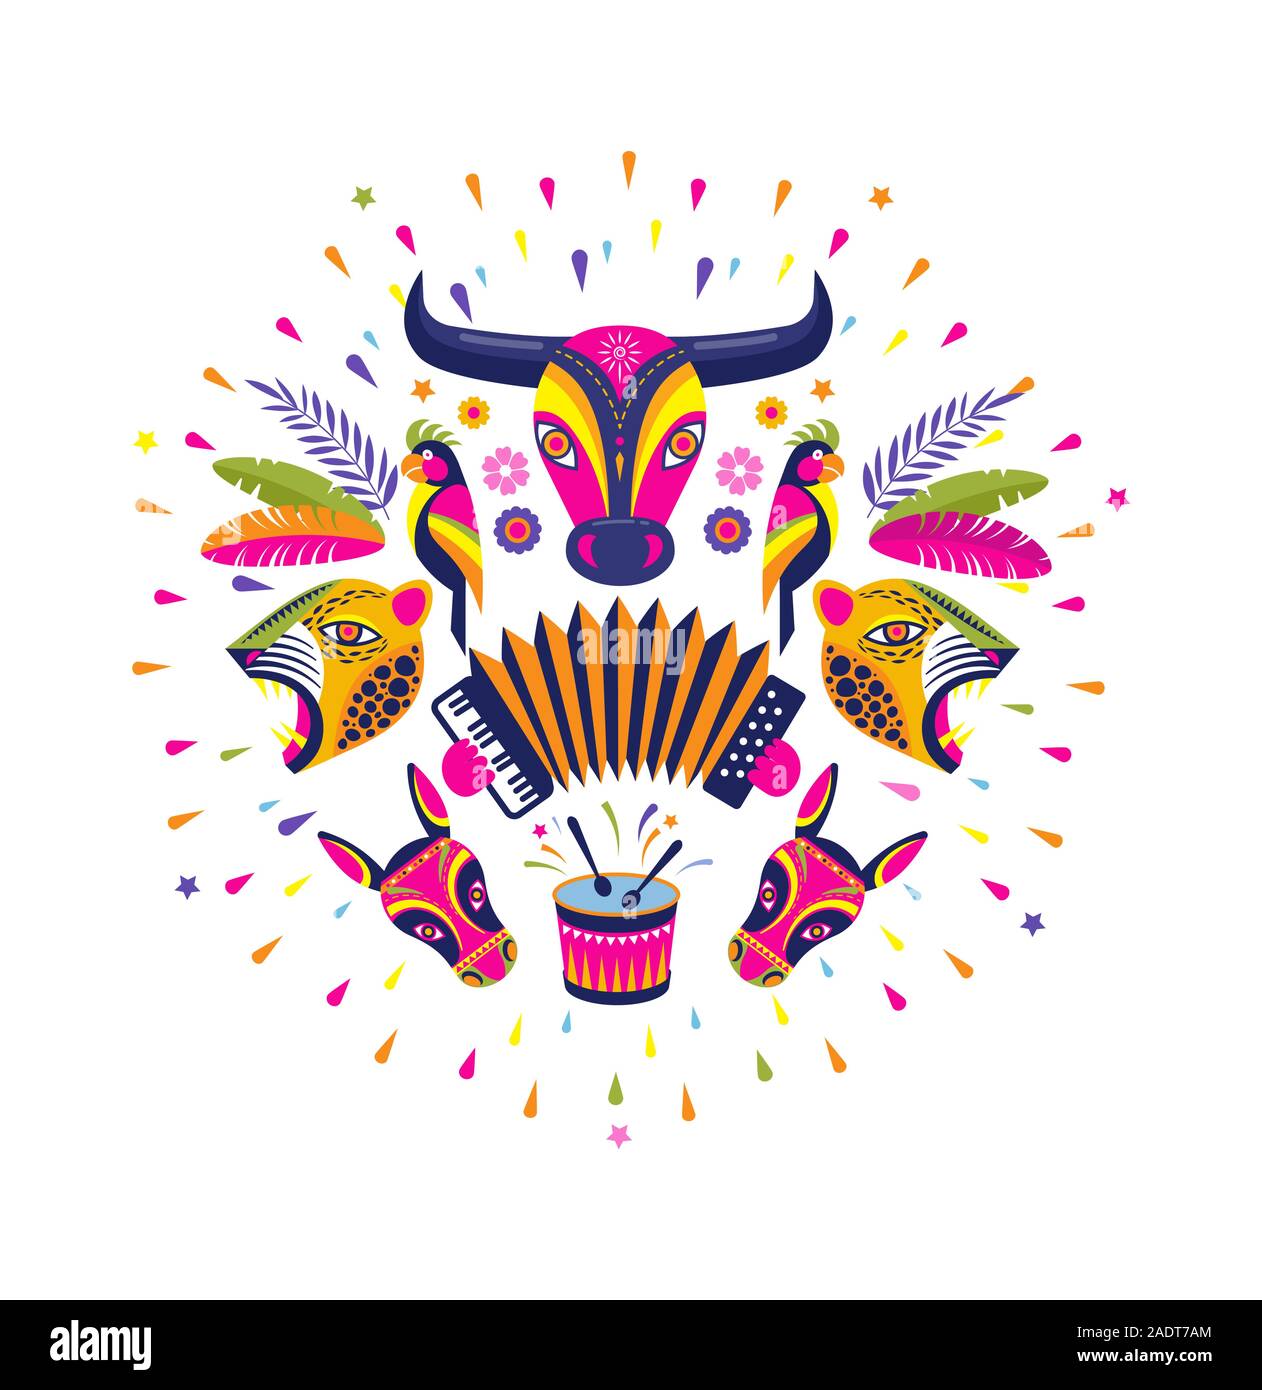 Carnaval de Barranquilla, Colombian carnival party. Vector illustration, poster and flyer Stock Vector